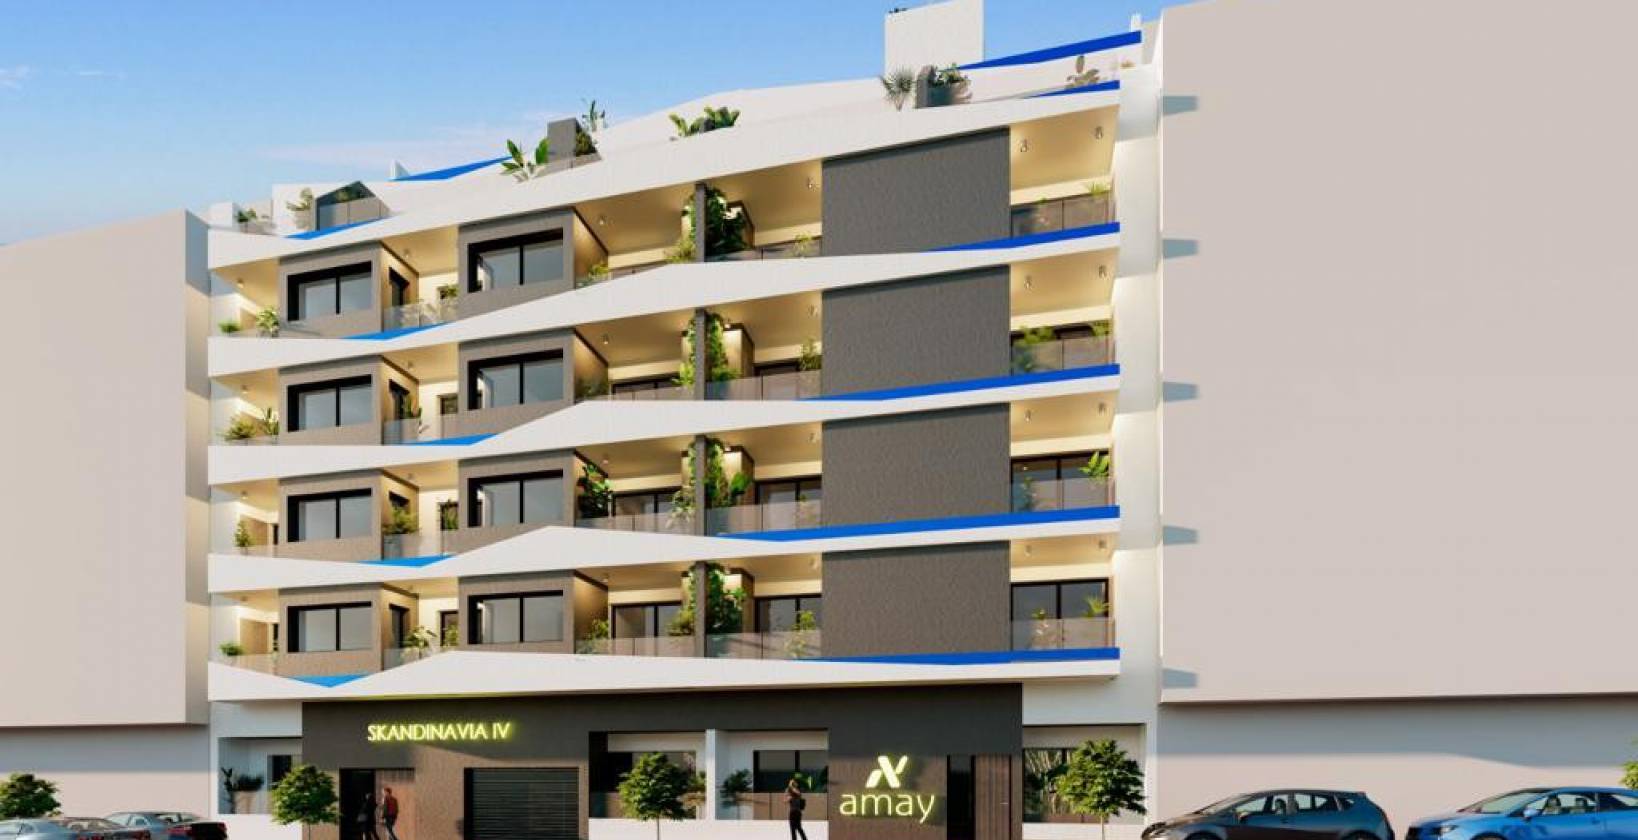 New Build - Penthouse - Torrevieja - Torrevieja - Playa del Cura